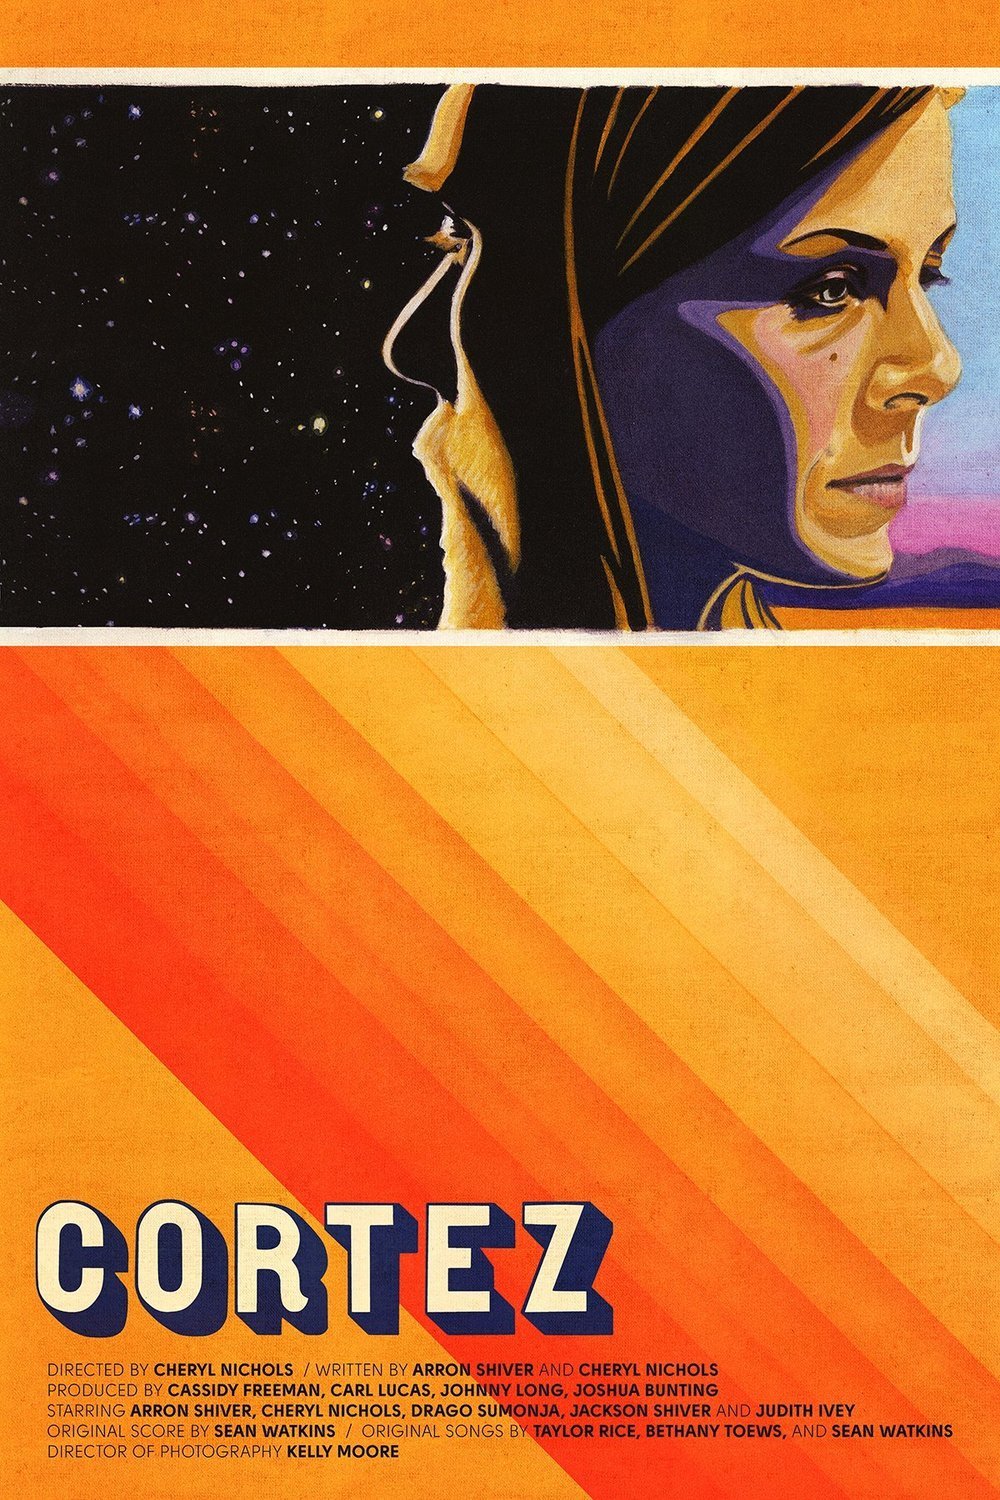 Poster of the movie Cortez